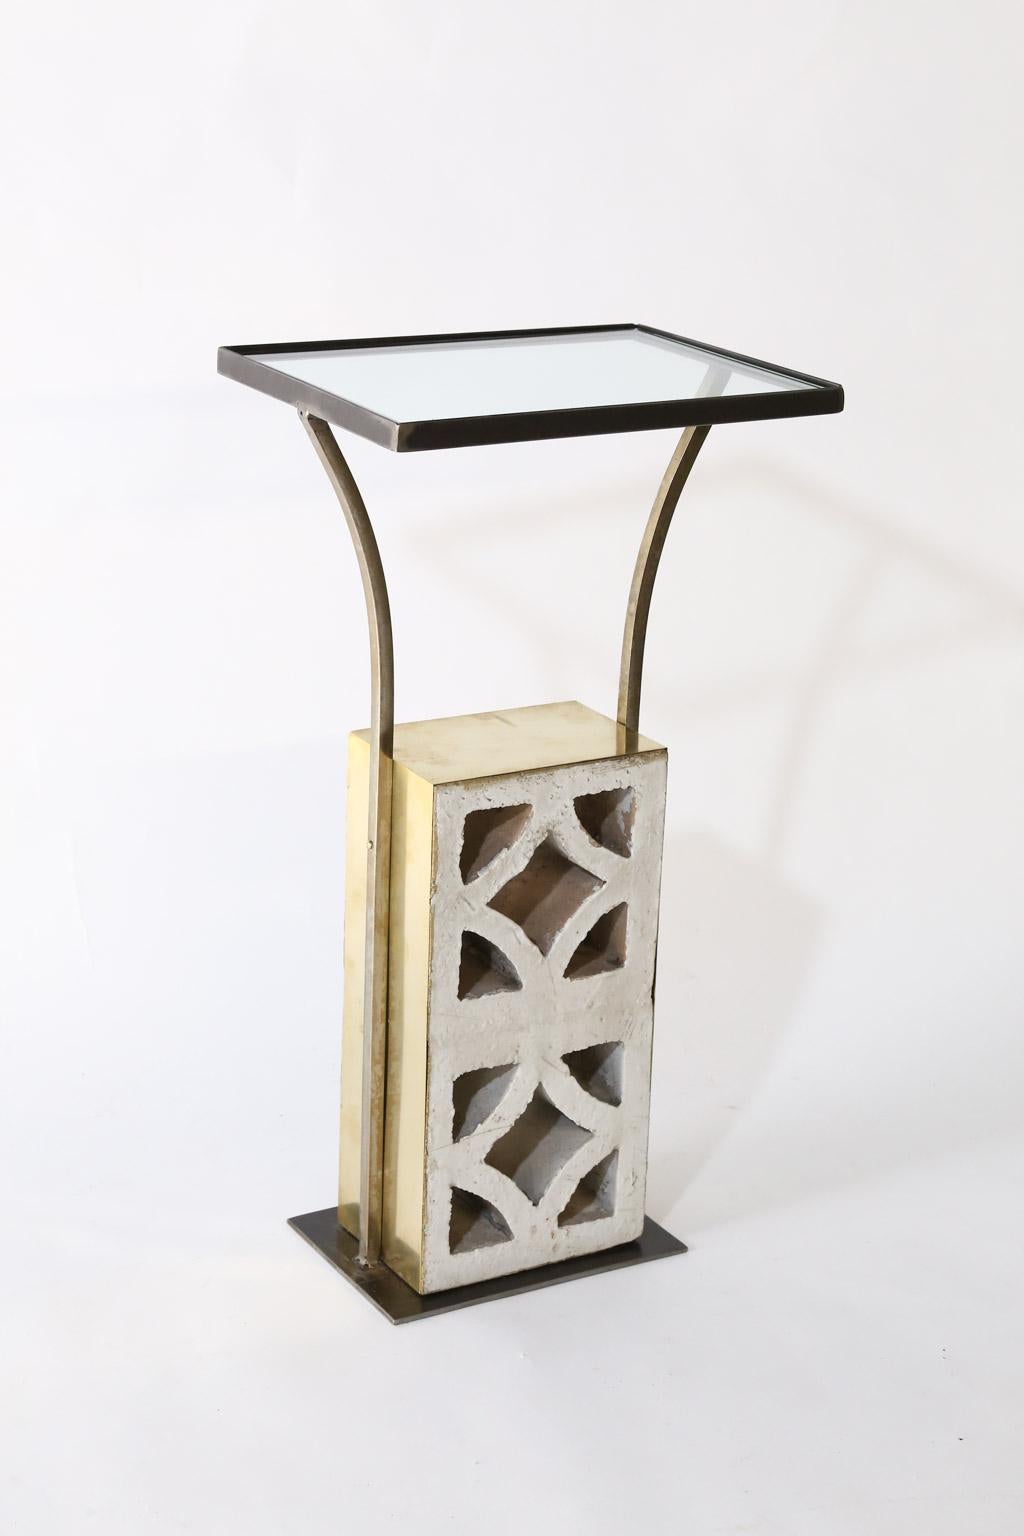 This is a wonderful pair of side tables made from reclaimed midcentury blocks. The concrete blocks were reclaimed from a demolition of a Mid-Century Modern building in Houston, Texas. The blocks are hand wrapped in brass, the frame was hand made